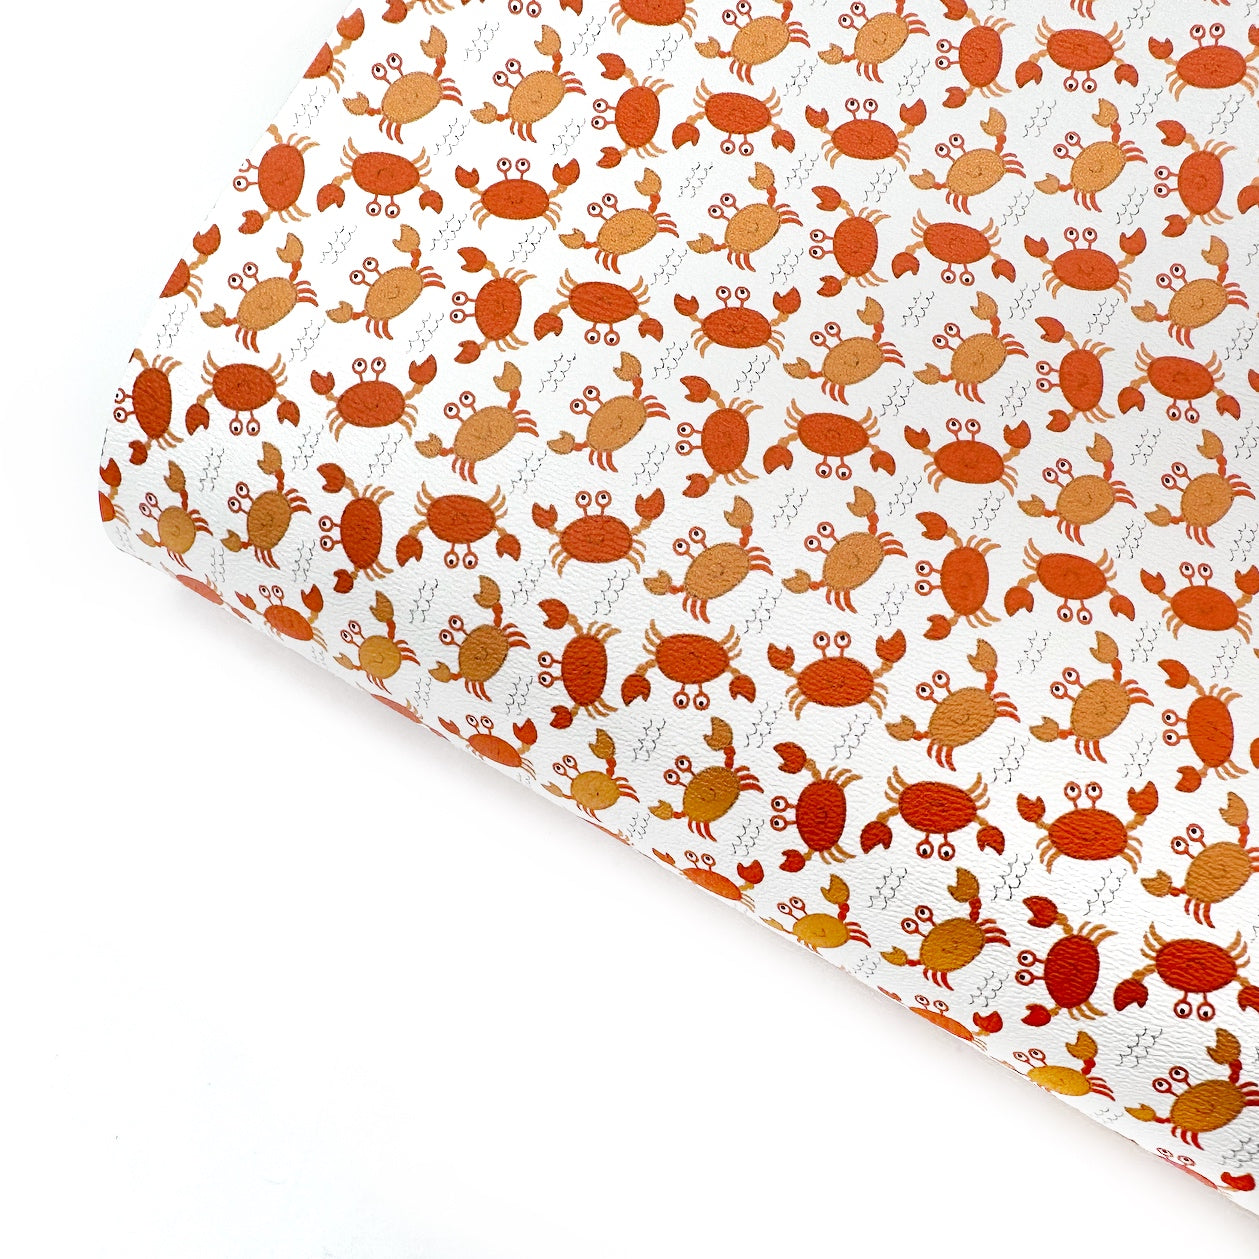 Mr Crab Premium Faux Leather Fabric Sheets